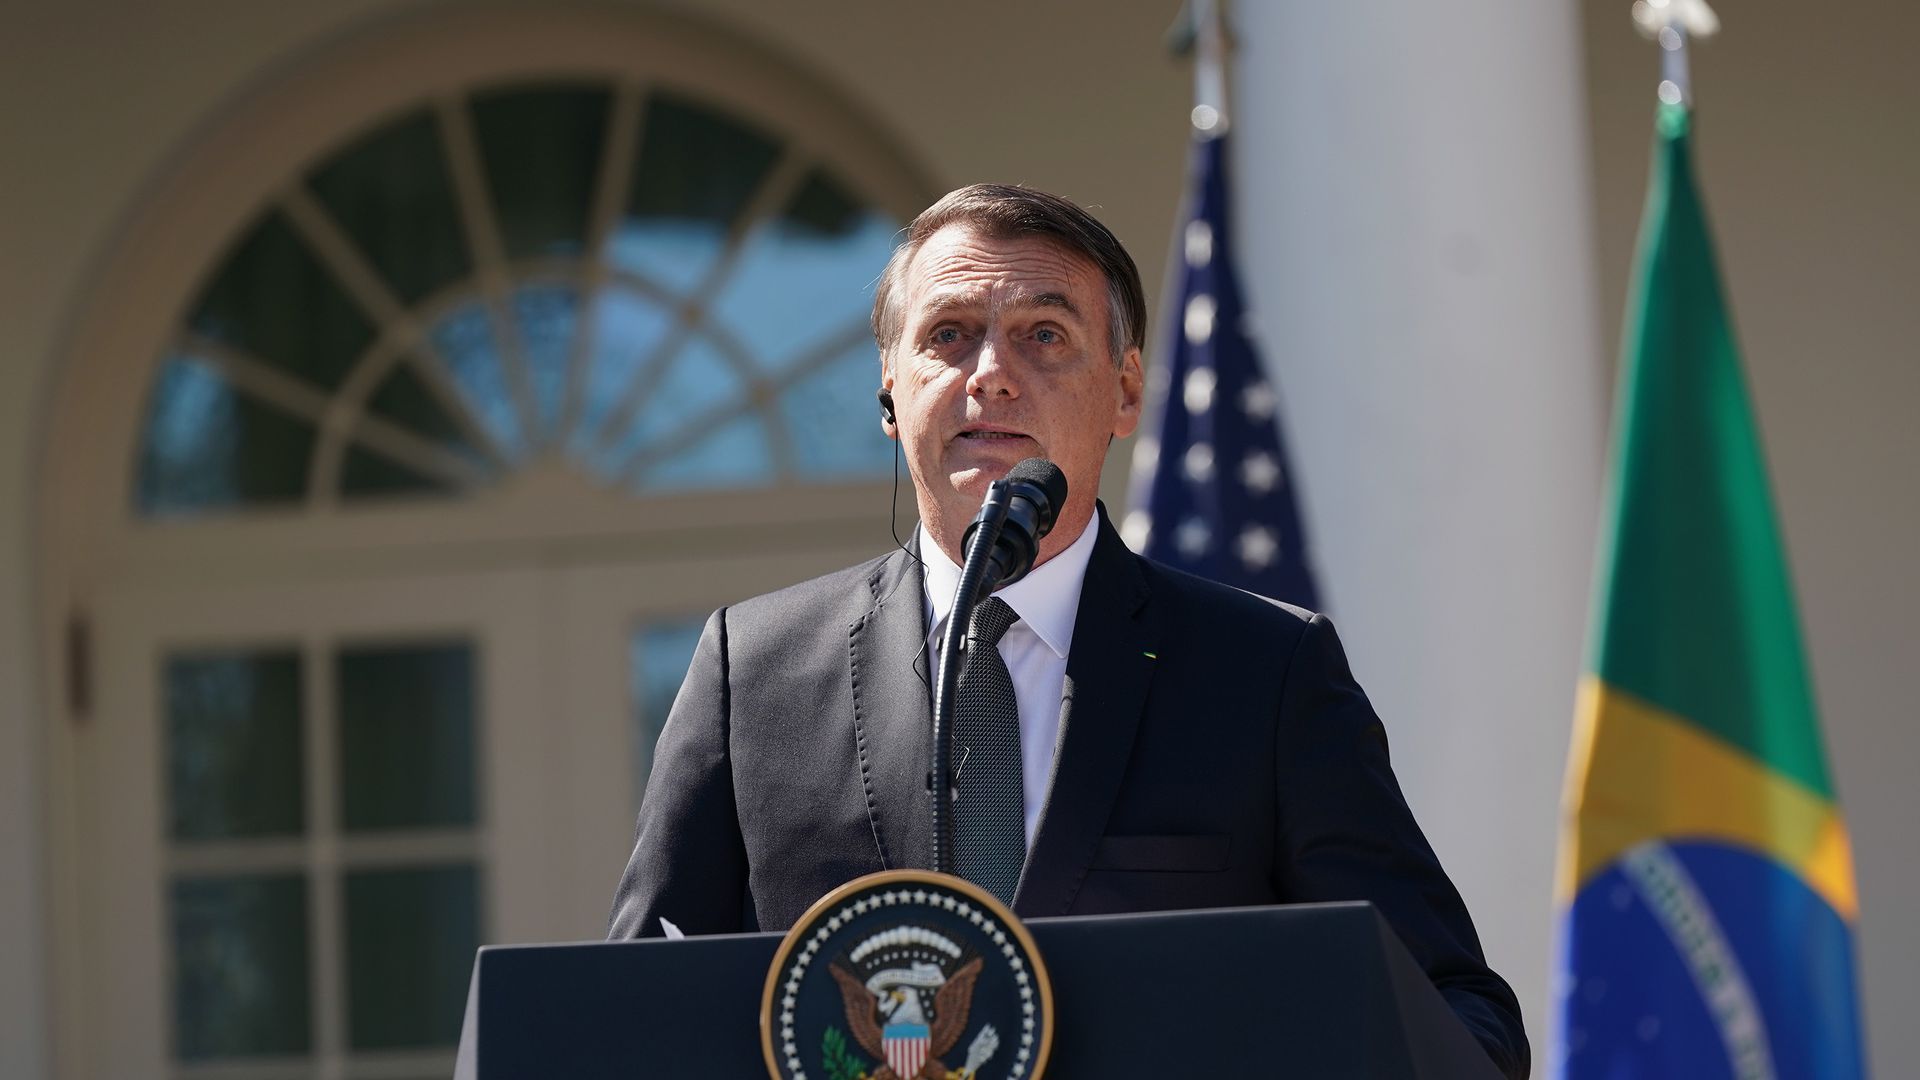 Brazilian President Jair Bolsonaro is pictured here speaking at a podium at the White House, with an American and Brazilian flag behind him.